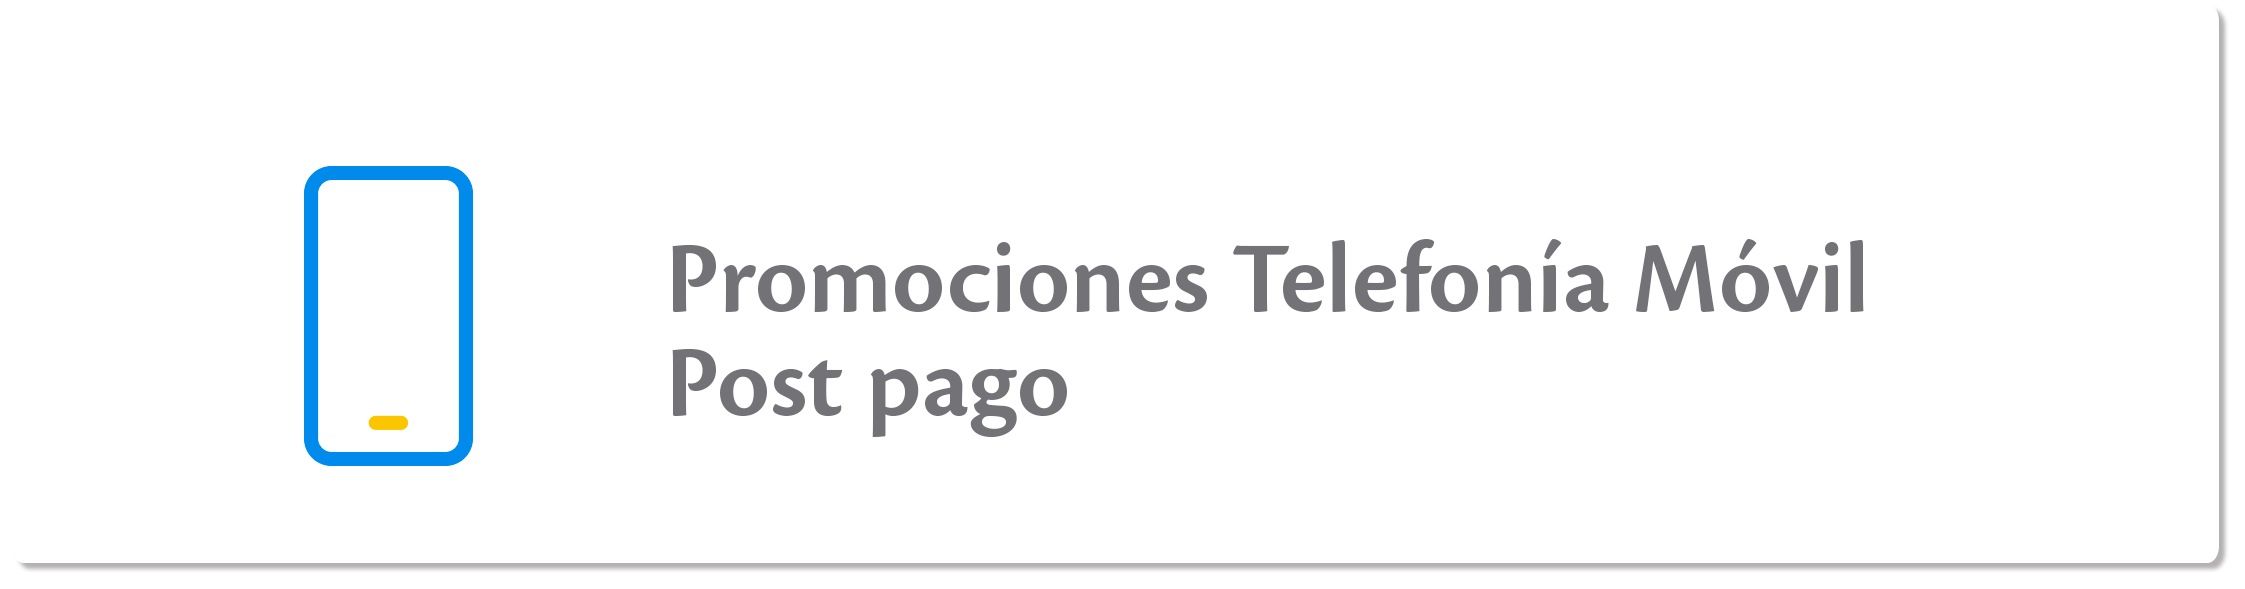 aw-promociones_movil_Post_pago.png